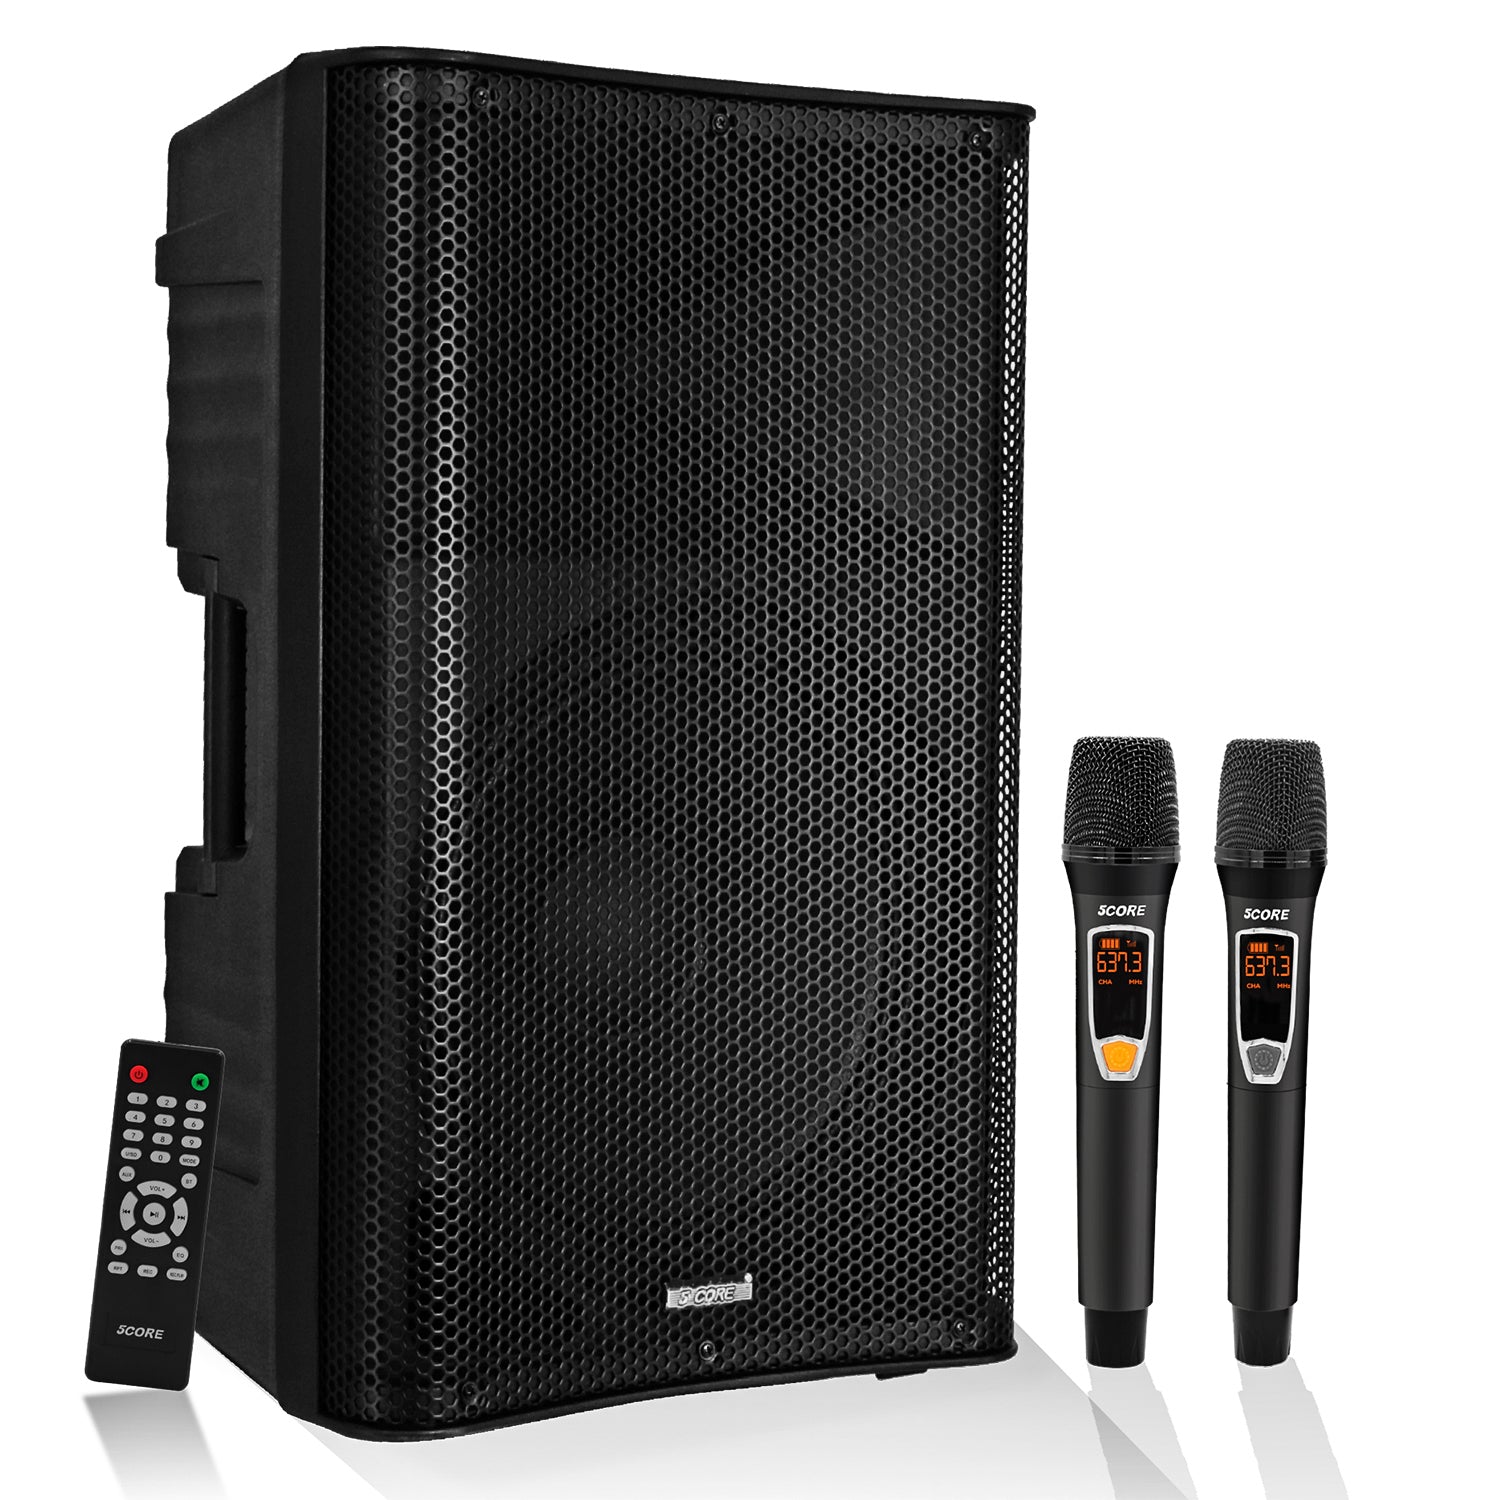 5Core 200W Karaoke Machine with Bluetooth, PA system, and wireless microphones.